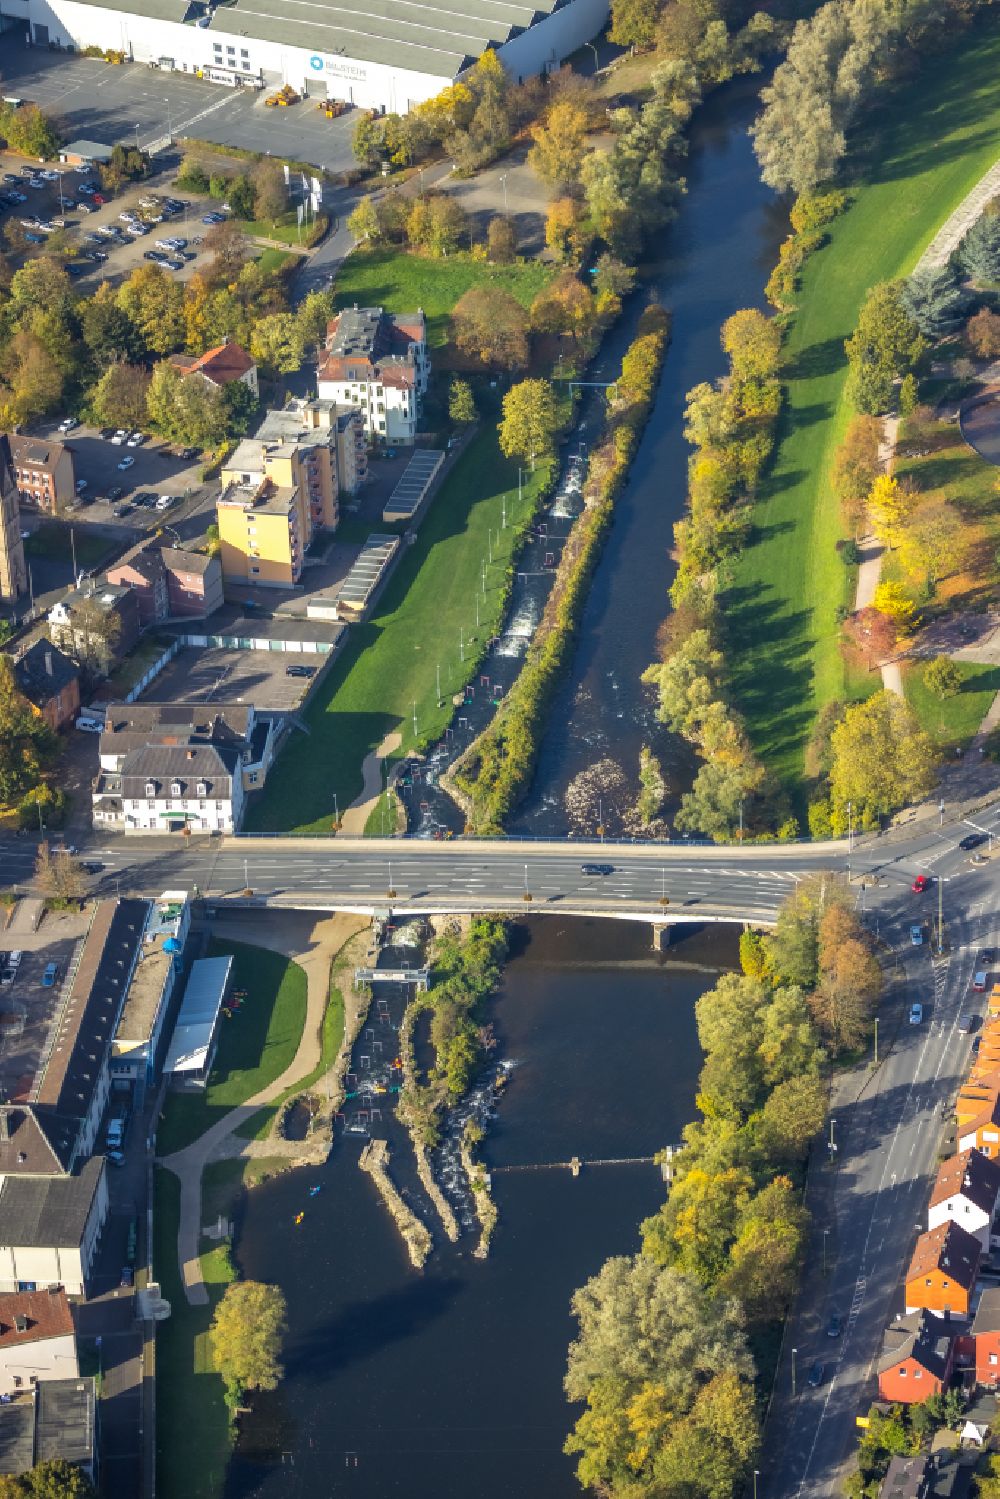 Hagen from above - Weir on the banks of the flux flow Lenne in the district Hohenlimburg in Hagen in the state North Rhine-Westphalia, Germany